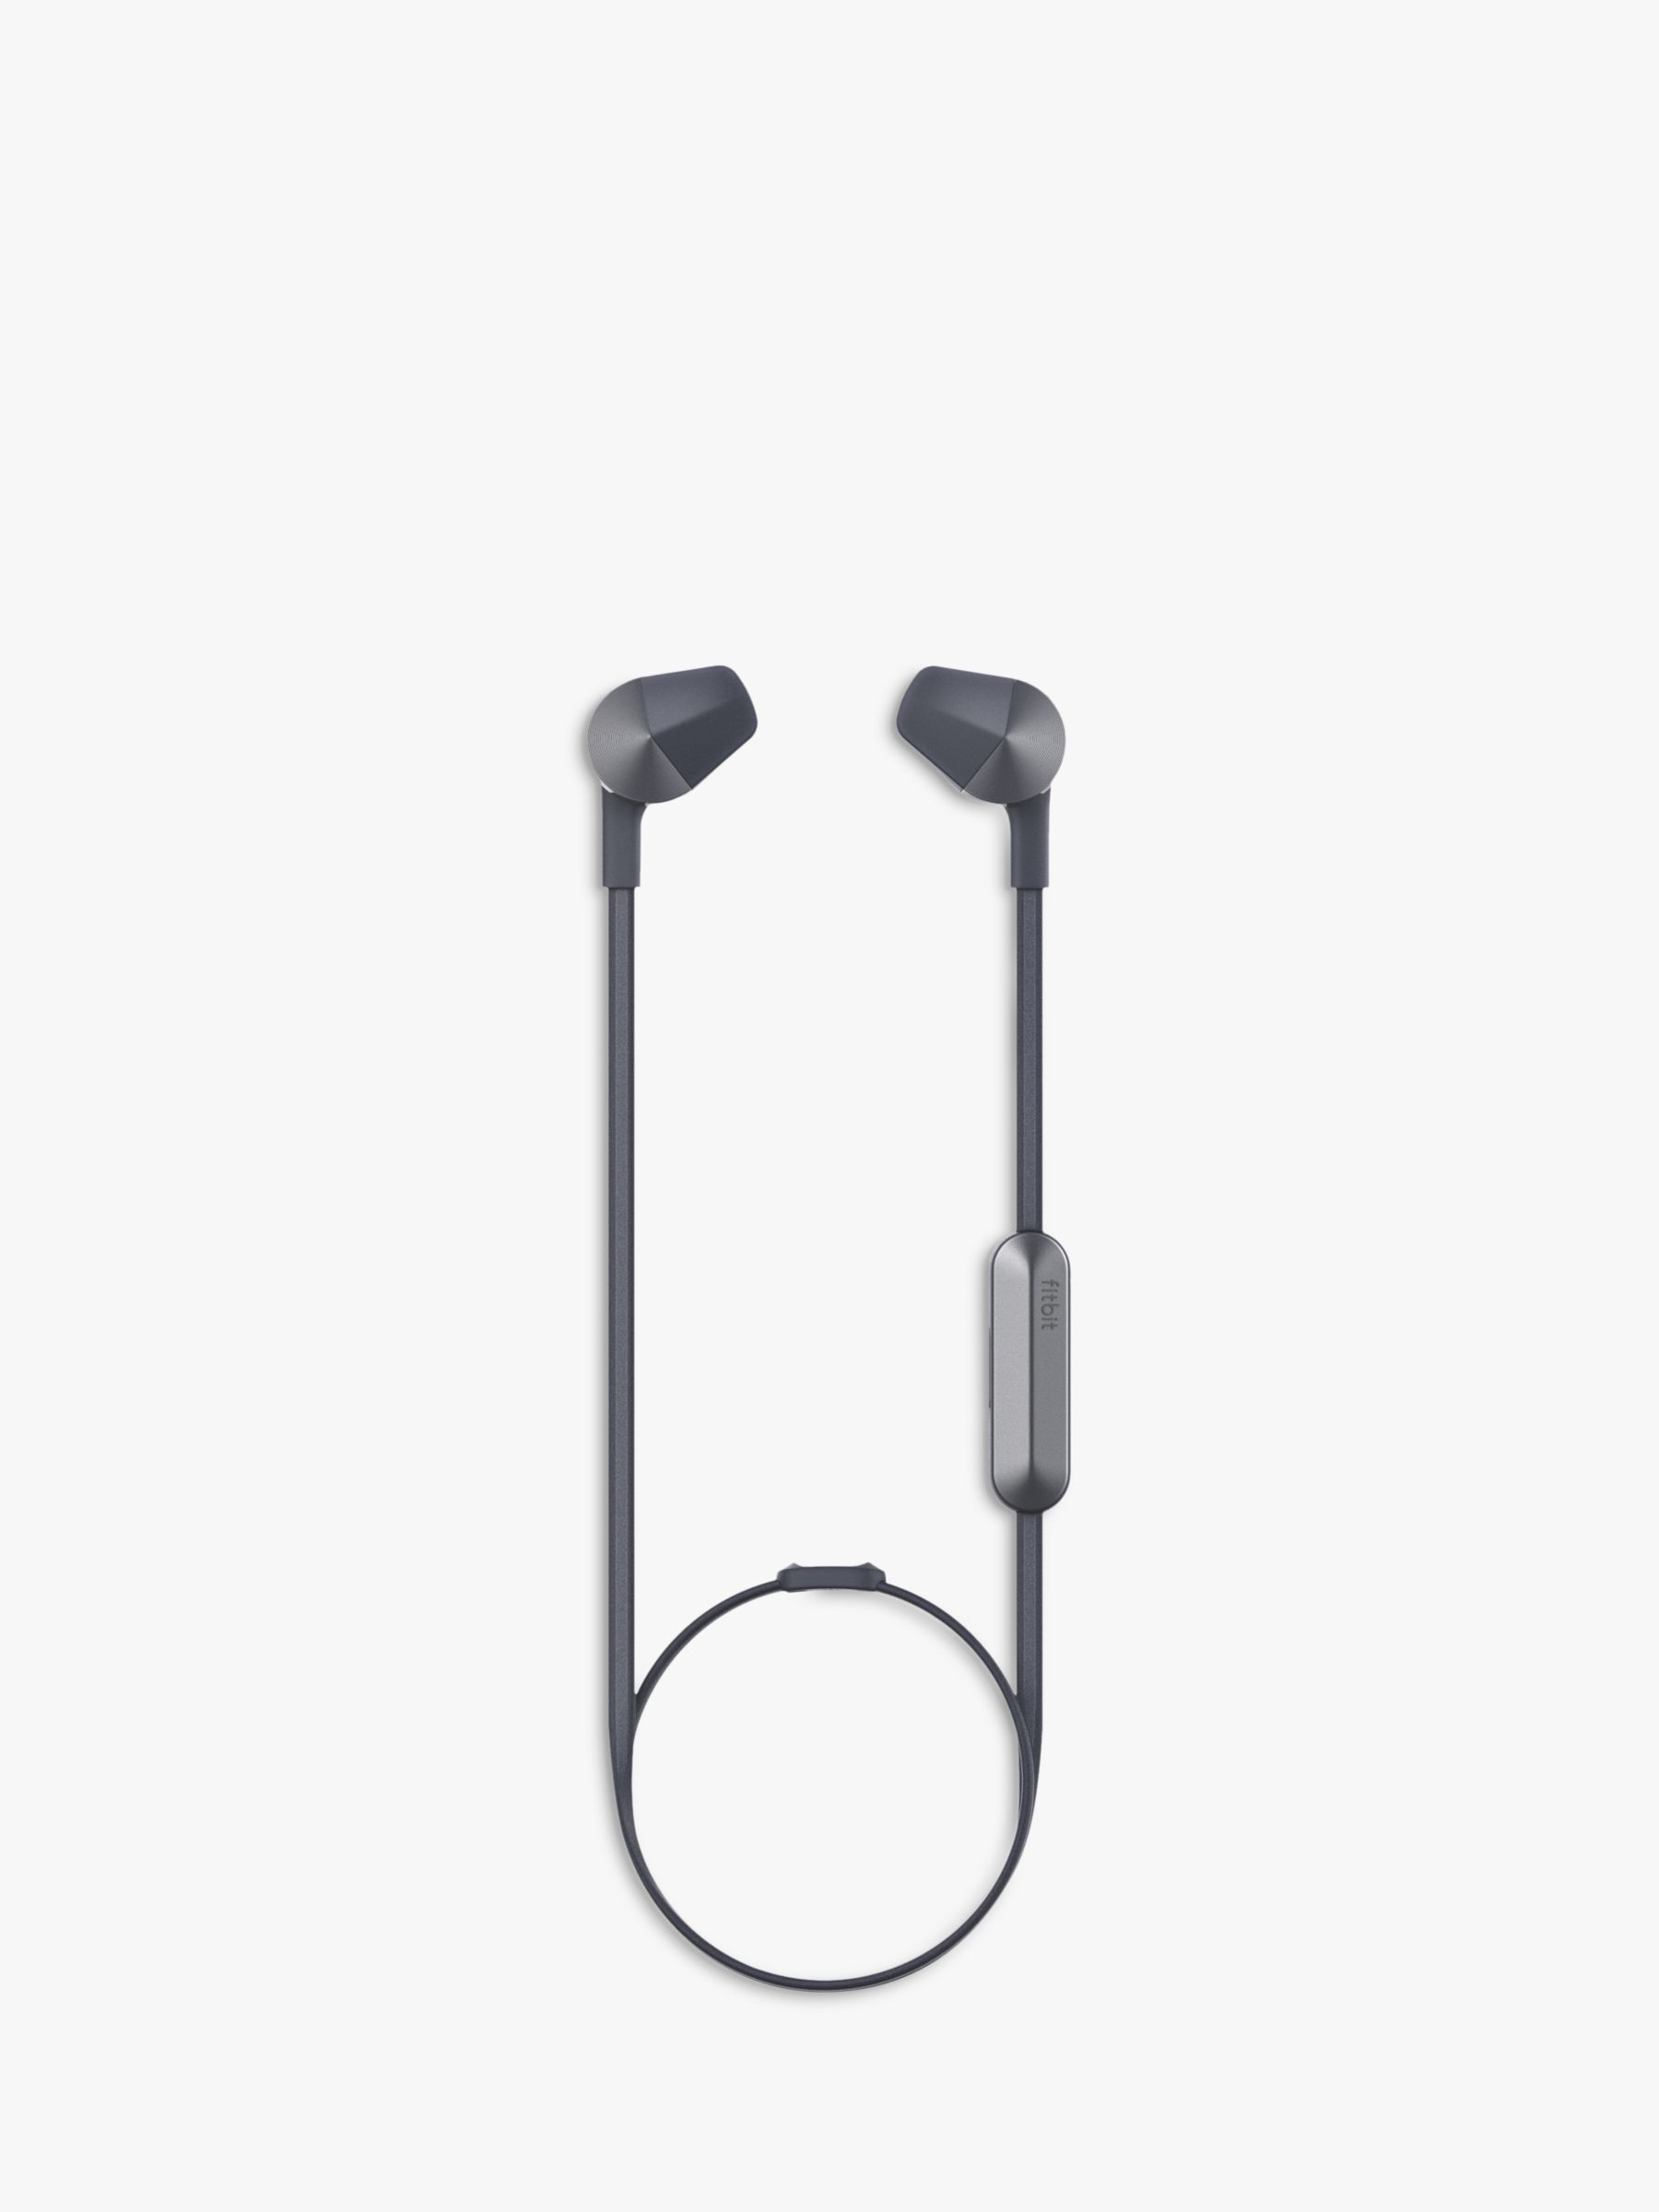 Fitbit Flyer Wireless In-Ear Fitness Headphones with 3-Button Control Box